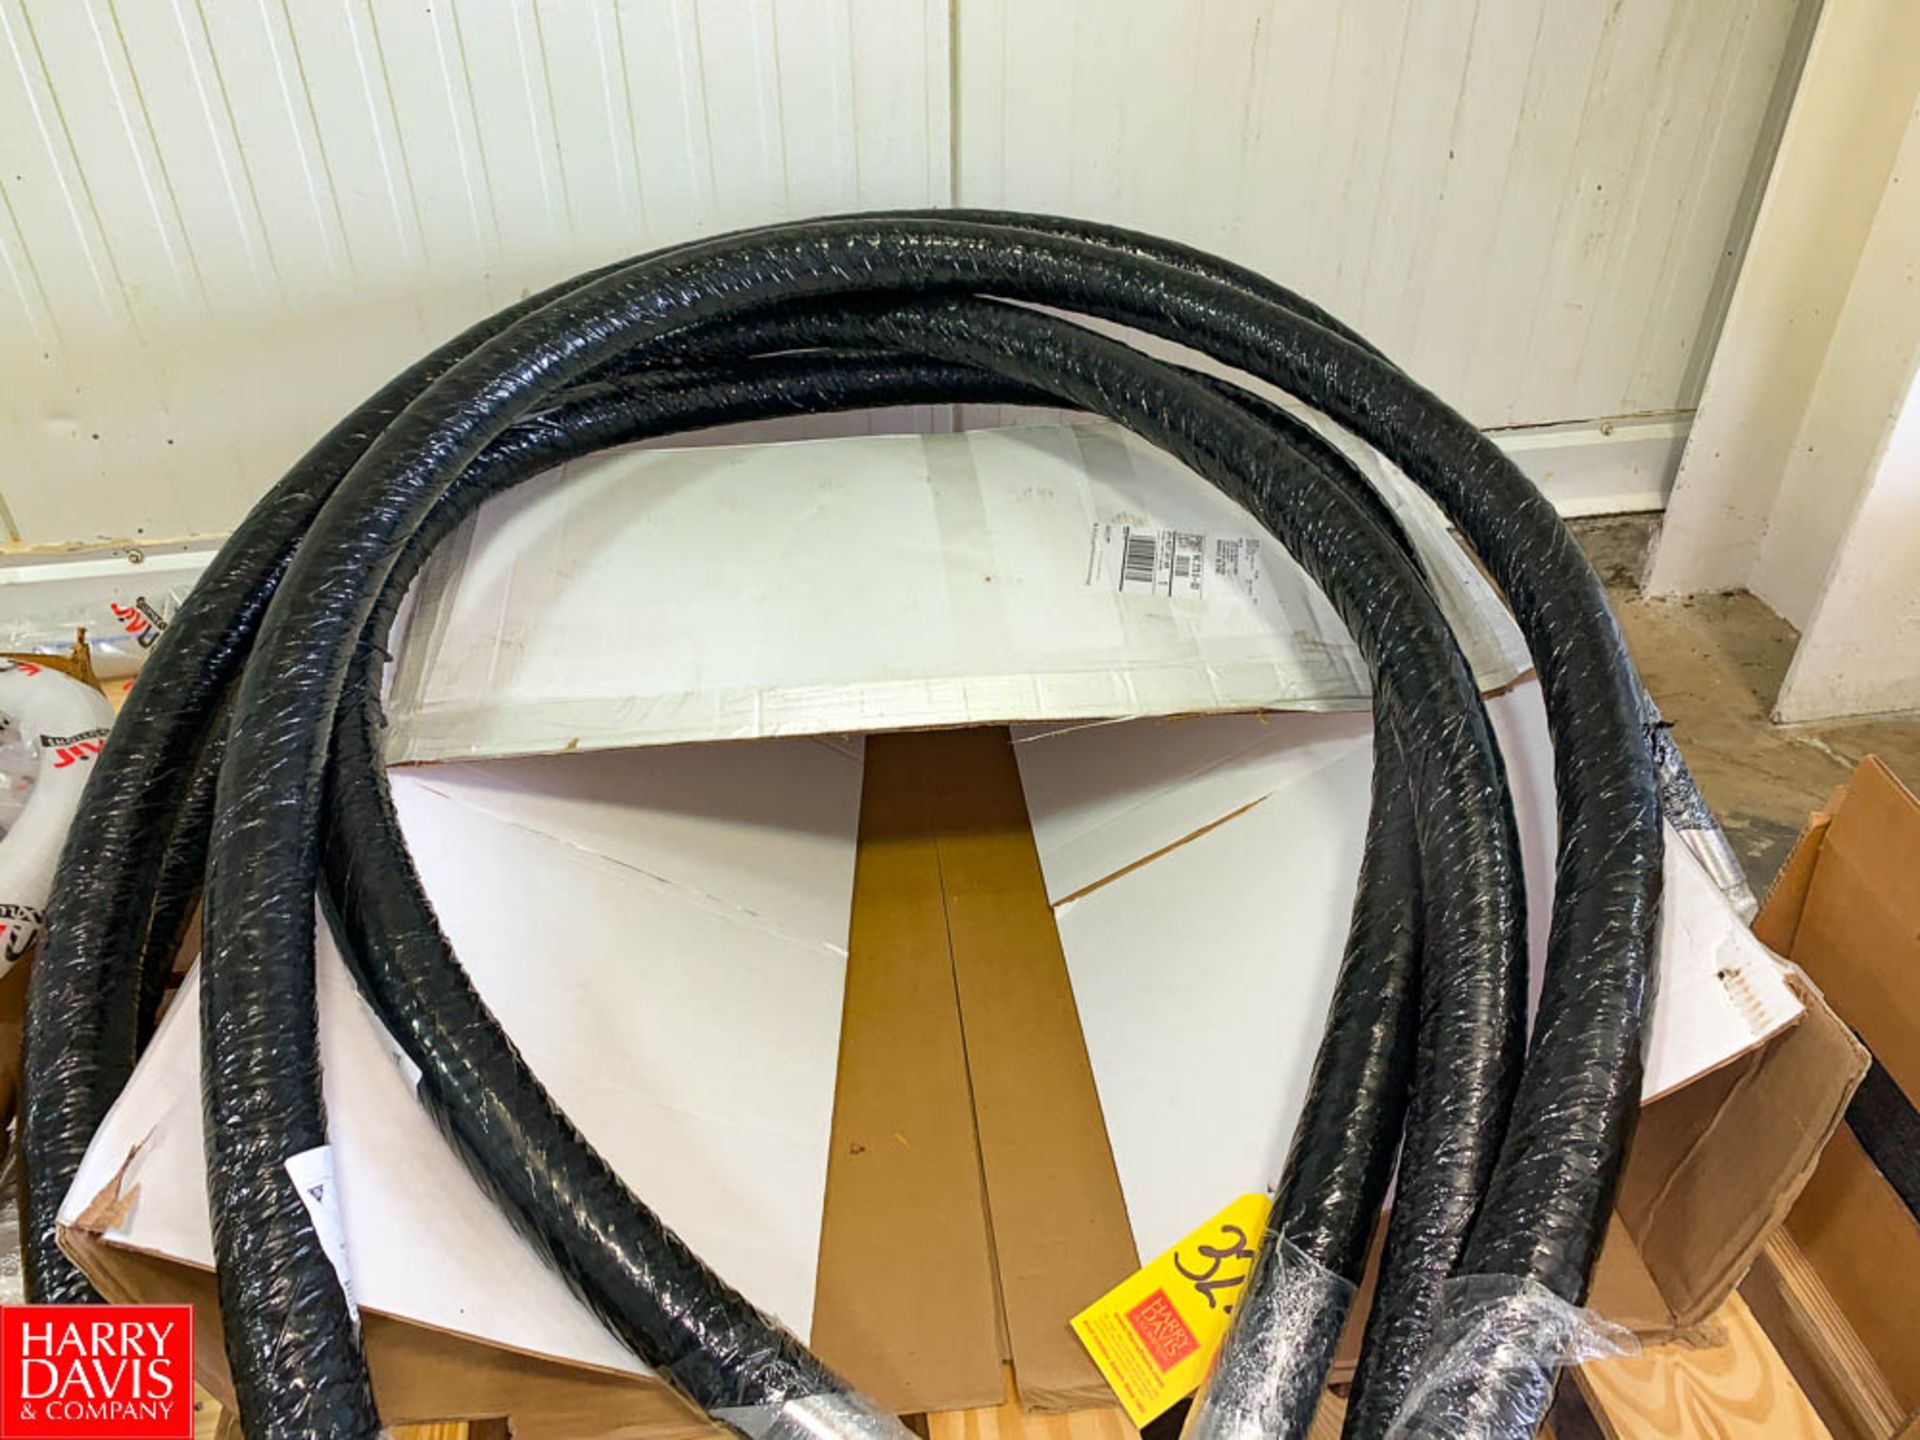 NEW Rubber Fab 2" Suction and Discharge Hoses Rigging Fee: $ 60